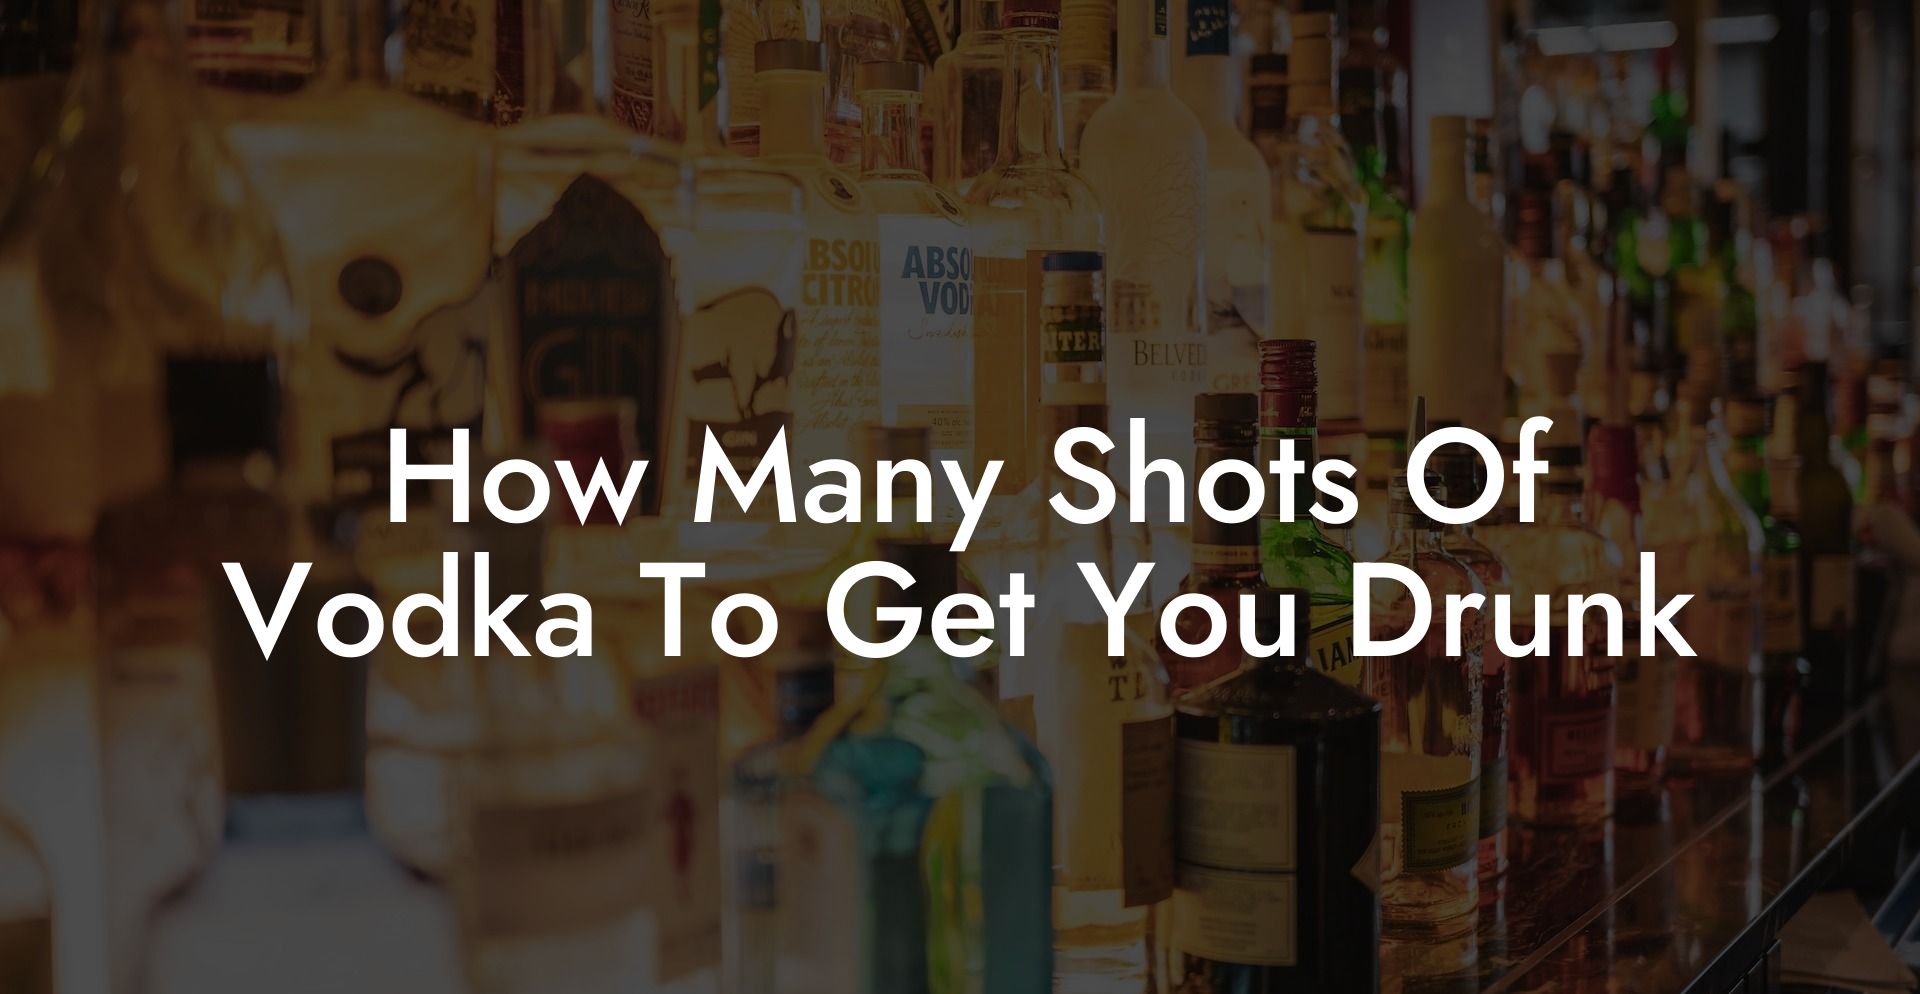 How Many Shots Of Vodka To Get You Drunk